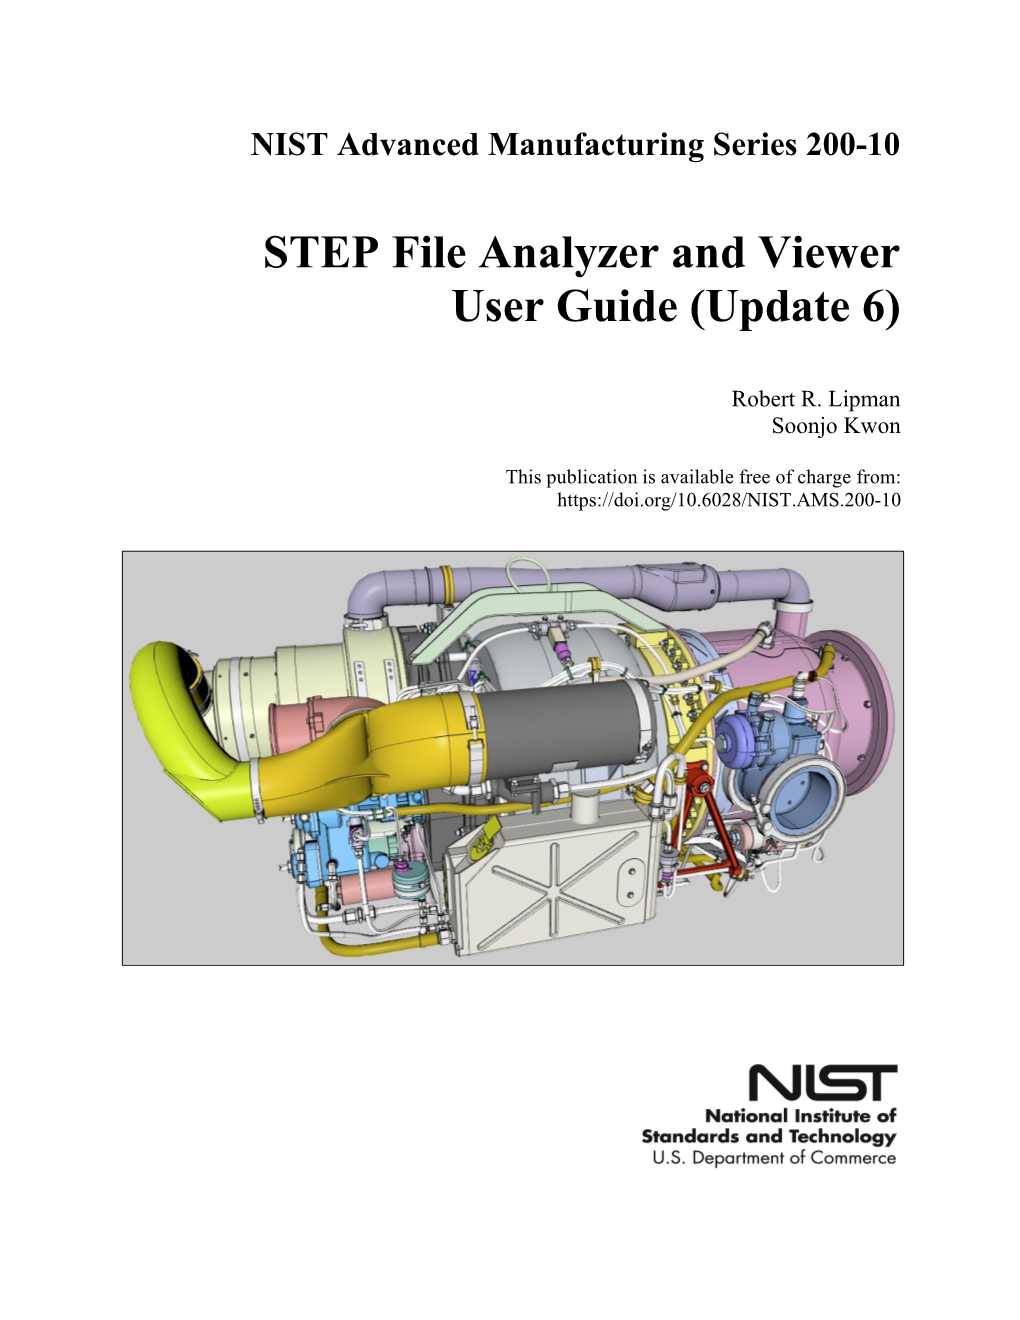 STEP File Analyzer and Viewer User Guide (Update 6)